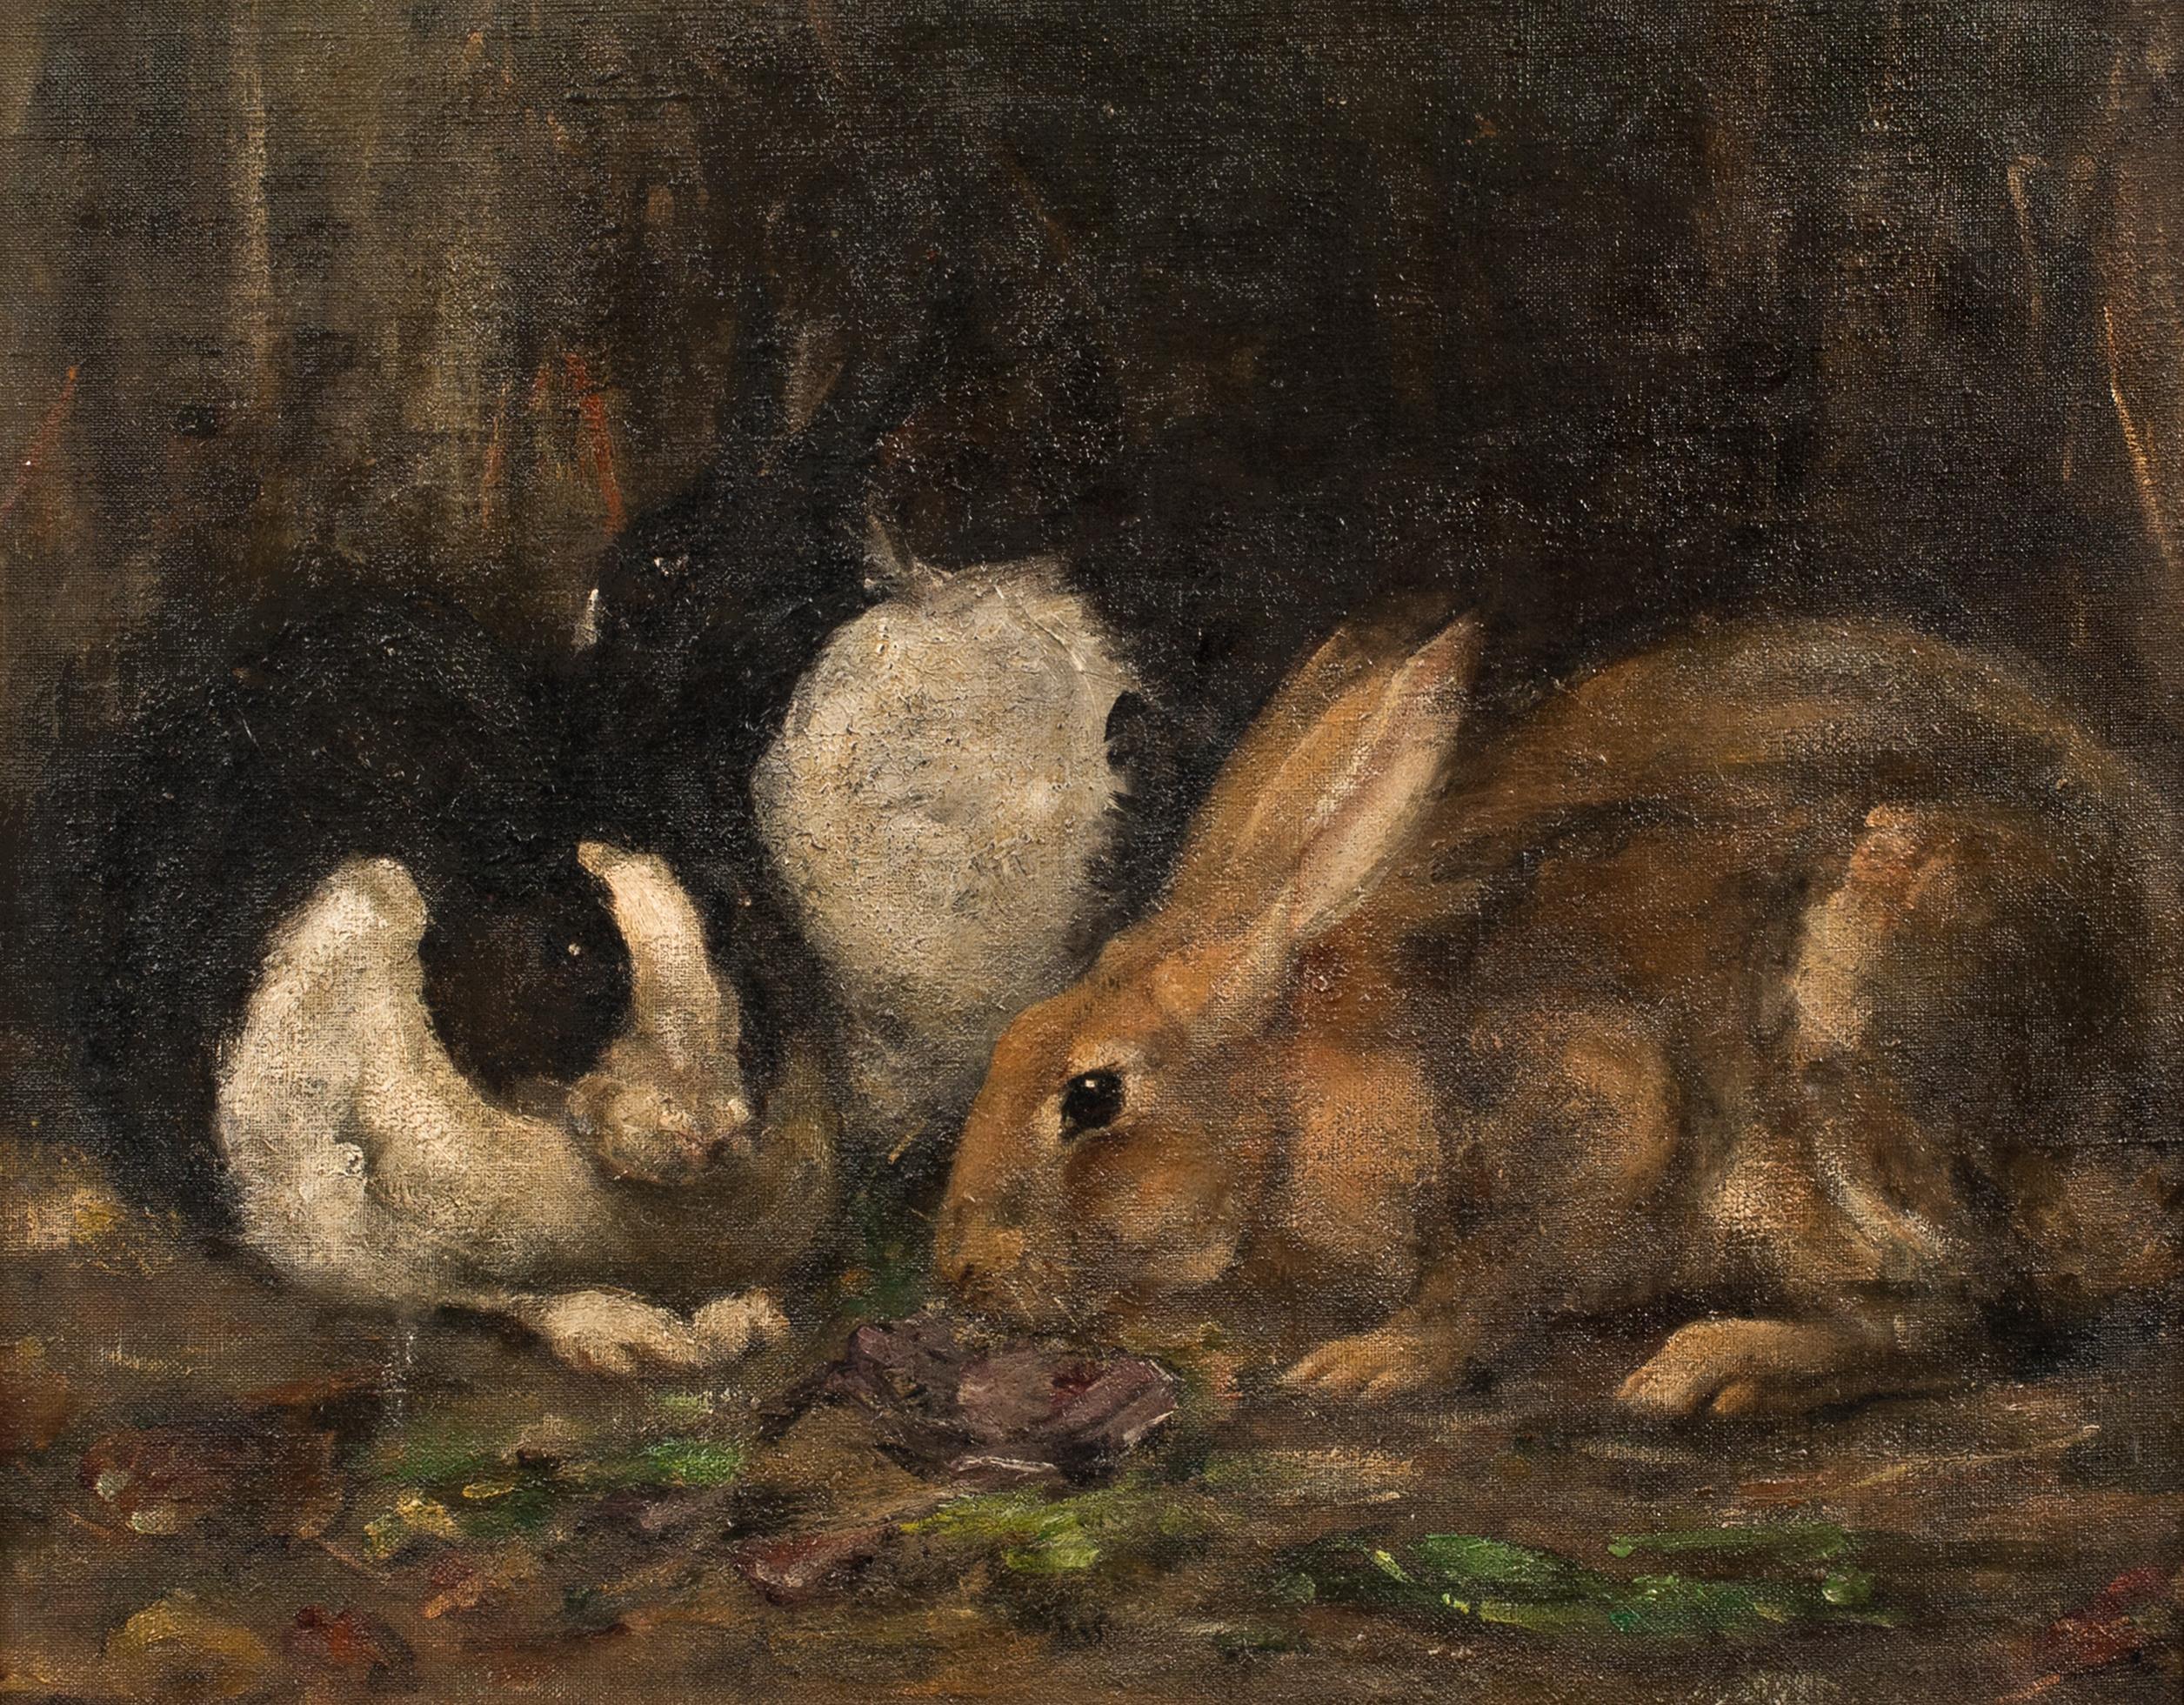 Unknown Portrait Painting - Study Of Rabbits Eating, early 20th century   English School